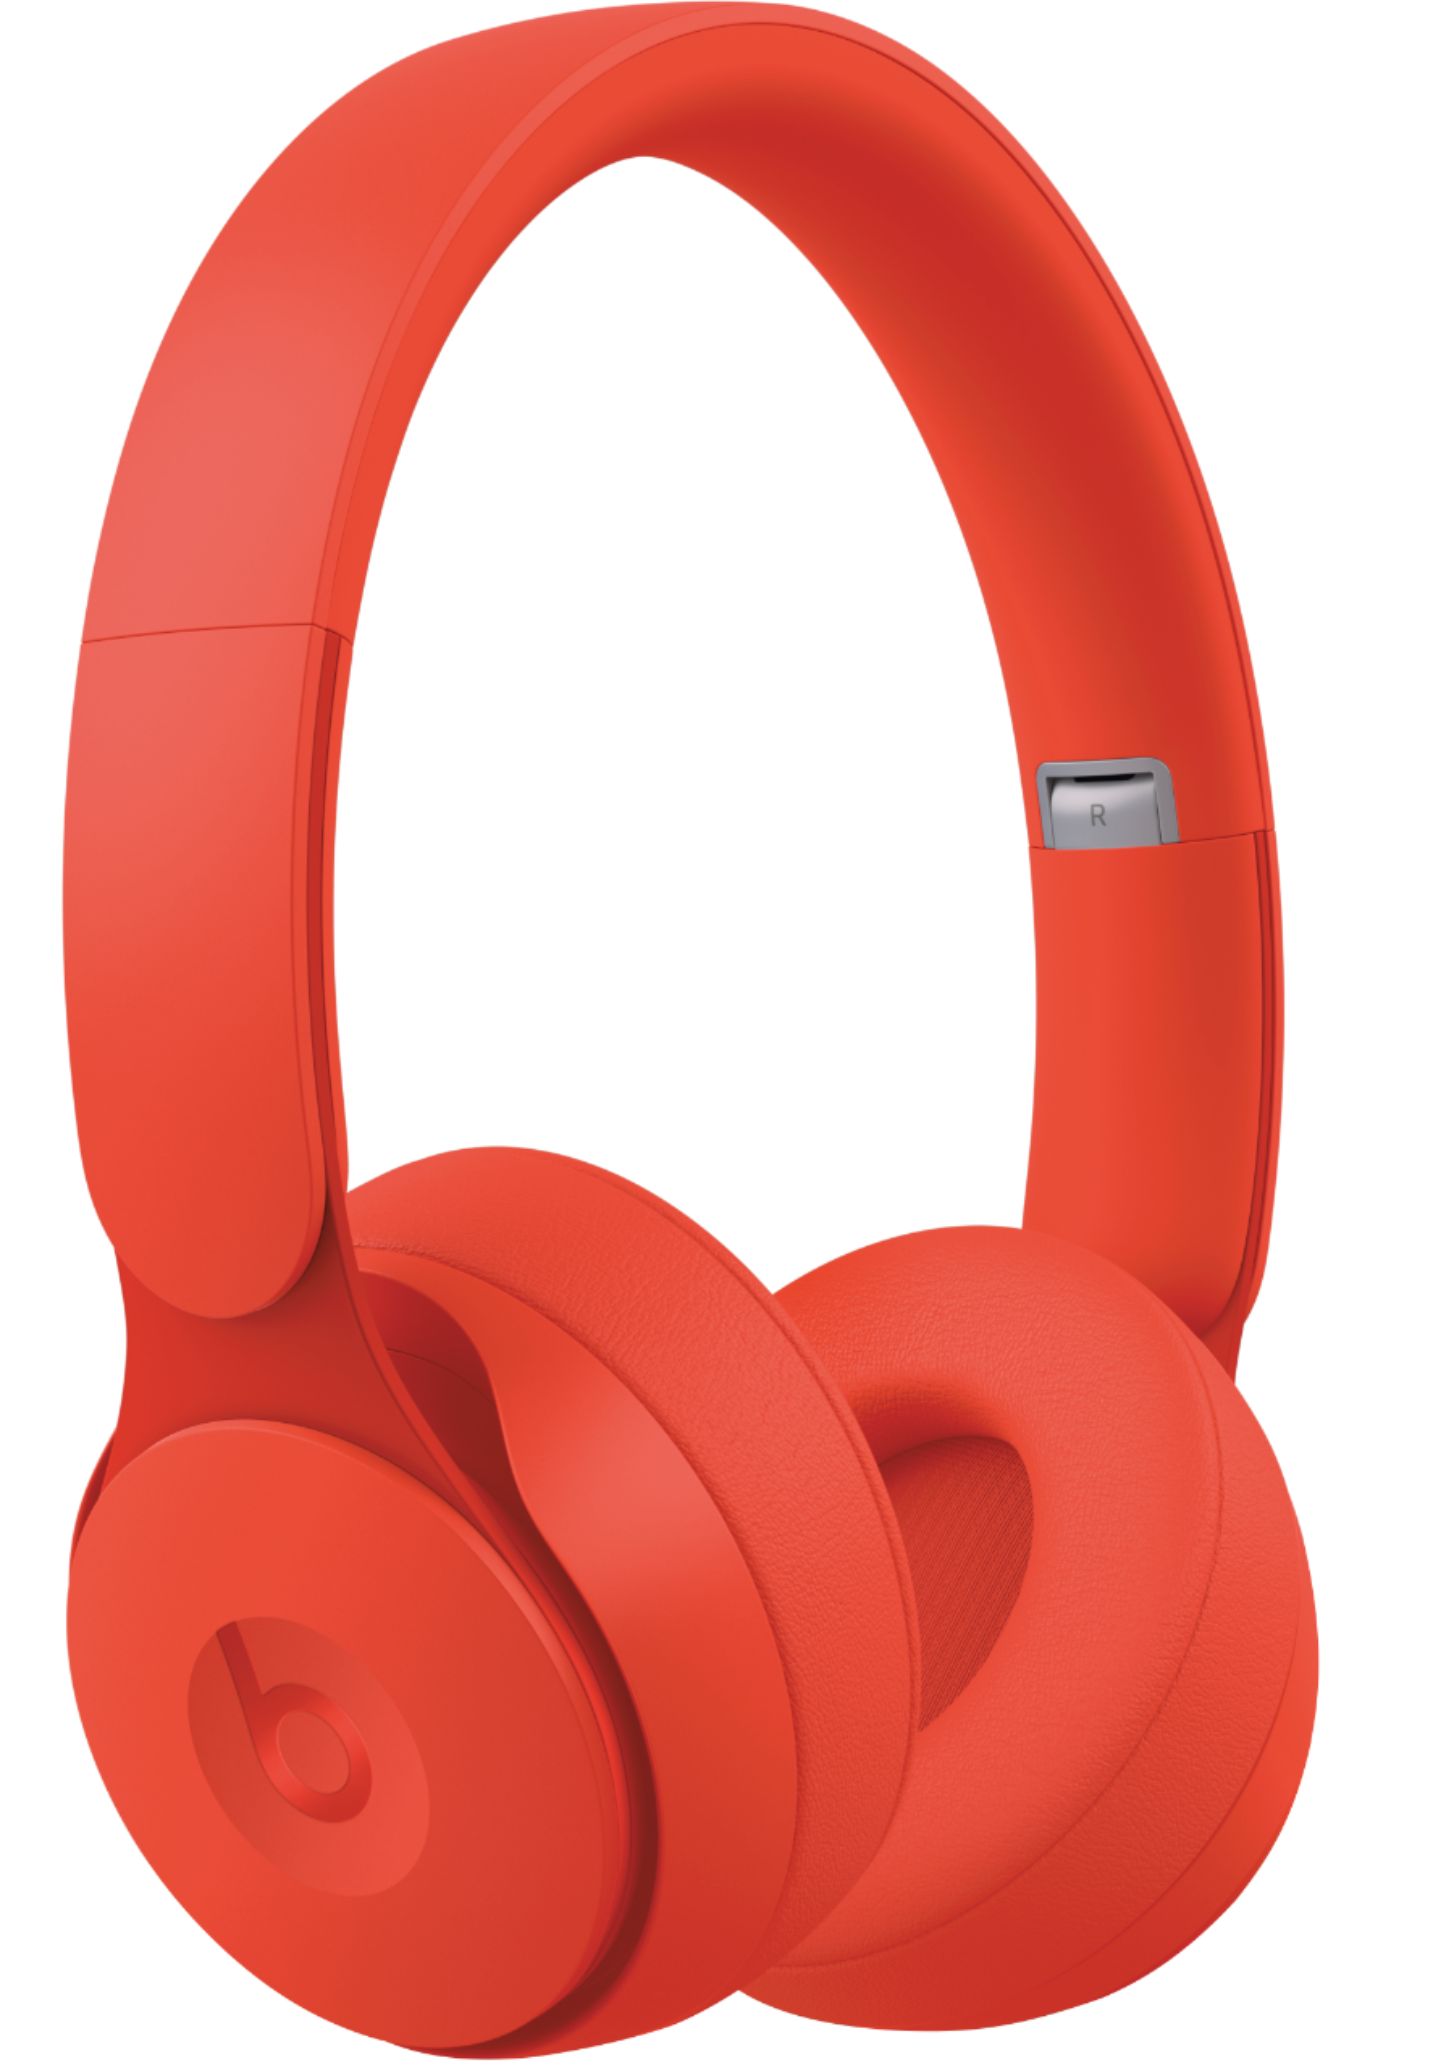 Beats by Dr. Dre Solo Pro More Matte Collection Wireless Noise